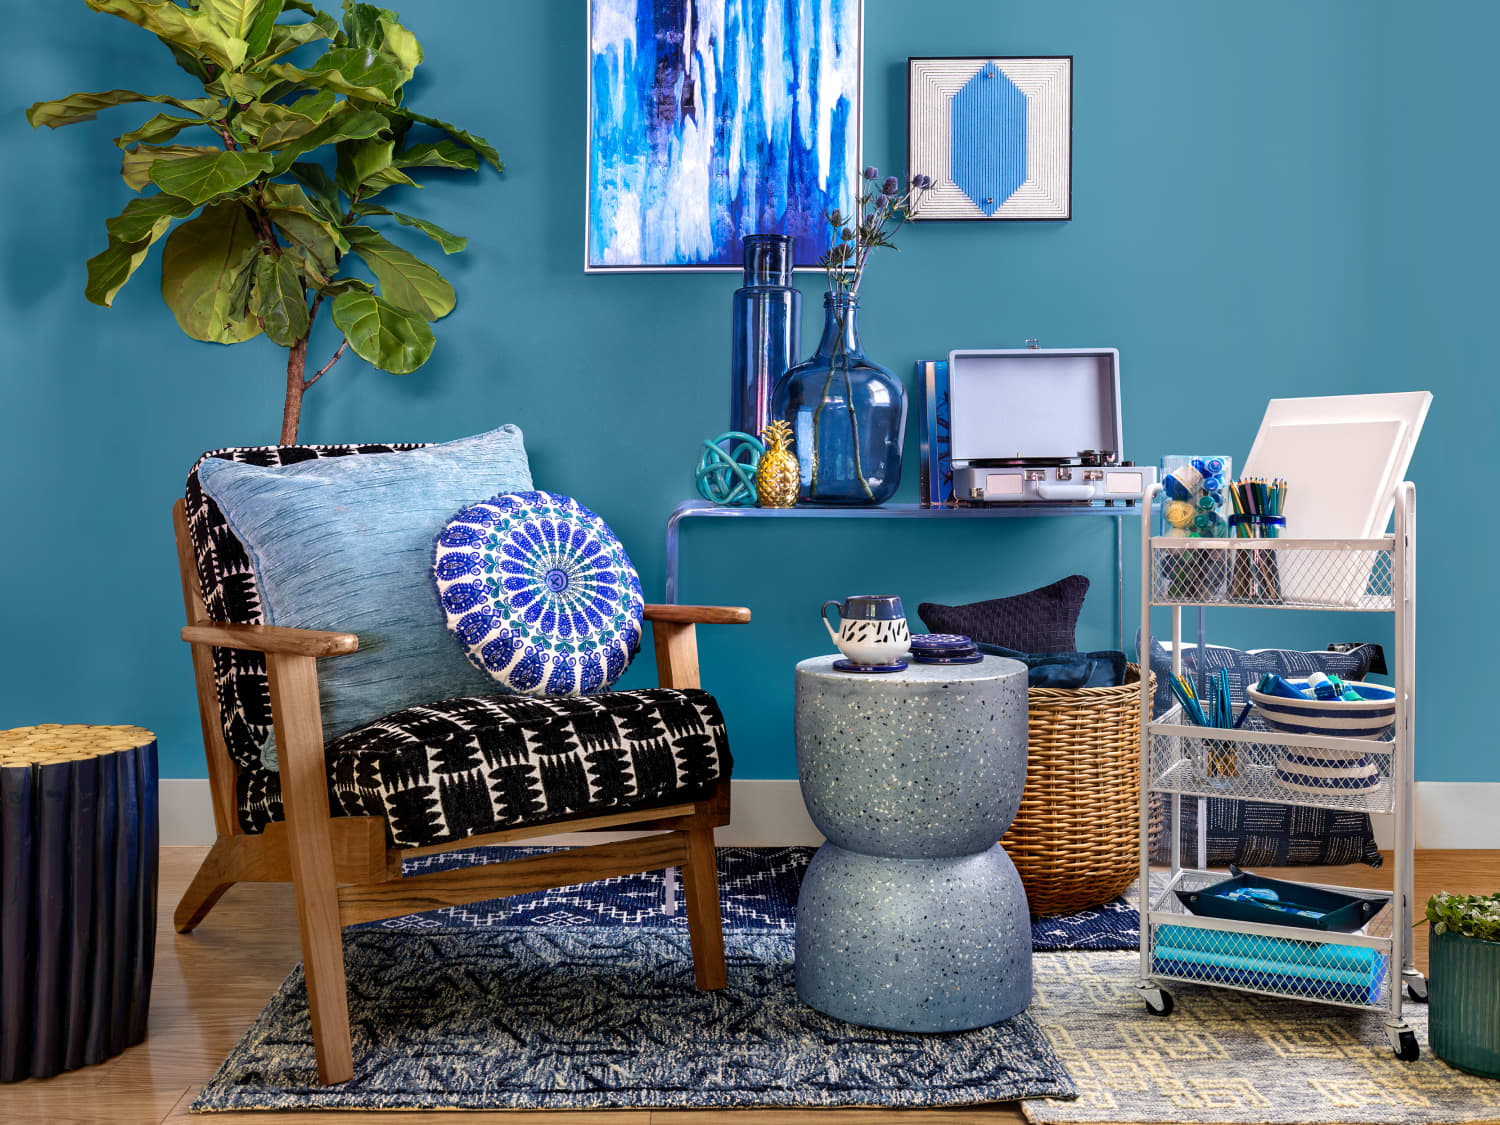 Interior Designer: Things to Never Buy at HomeGoods, What to Get